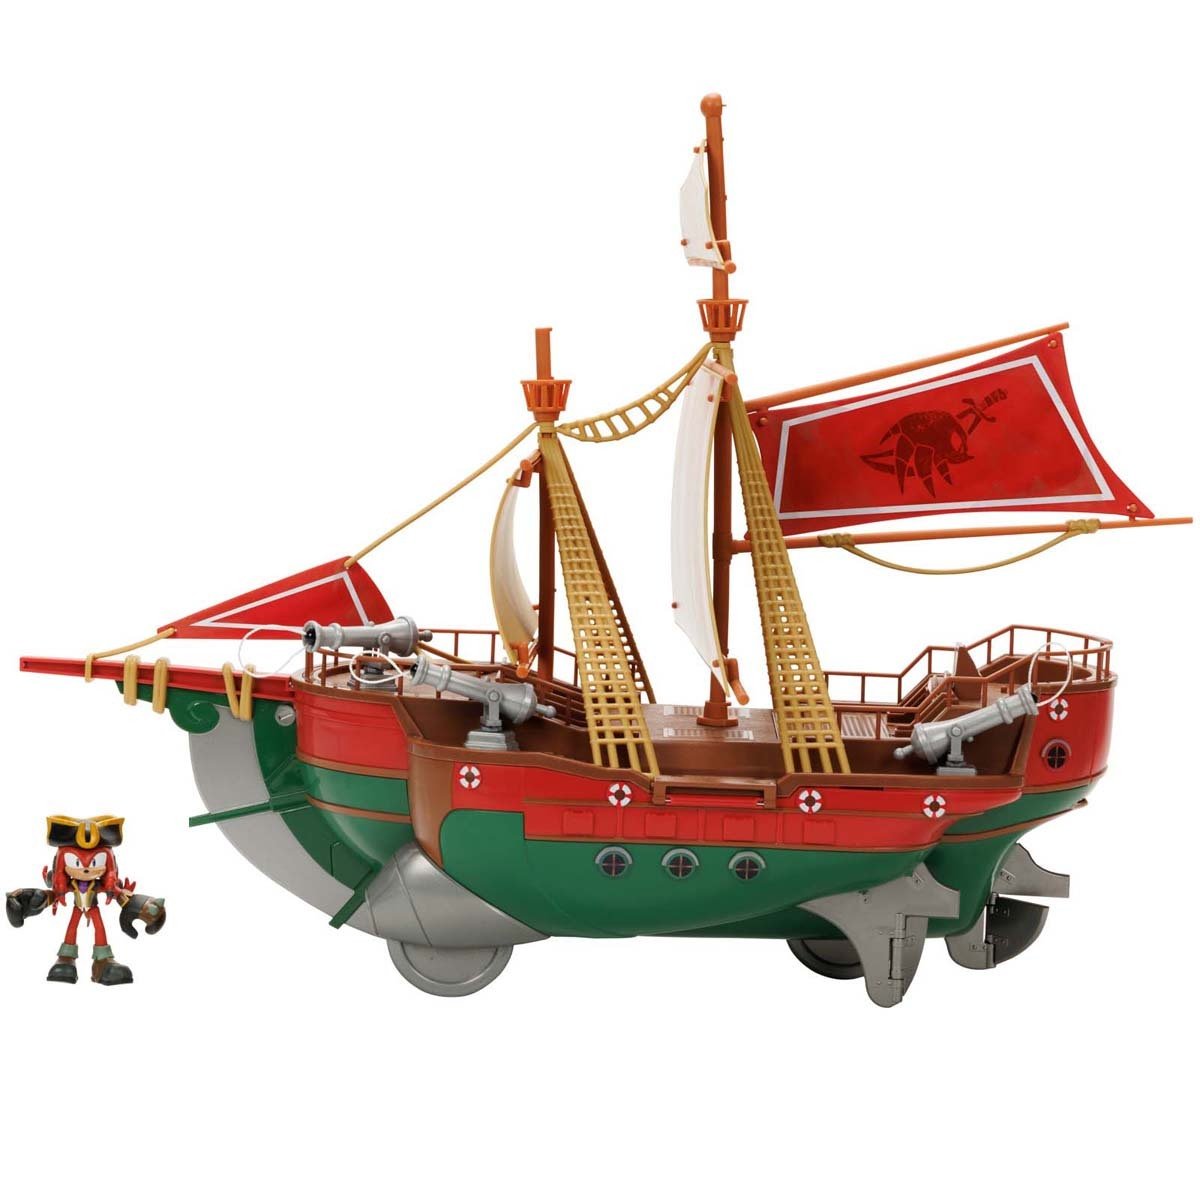 Sonic Prime Angels Voyage Ship Playset